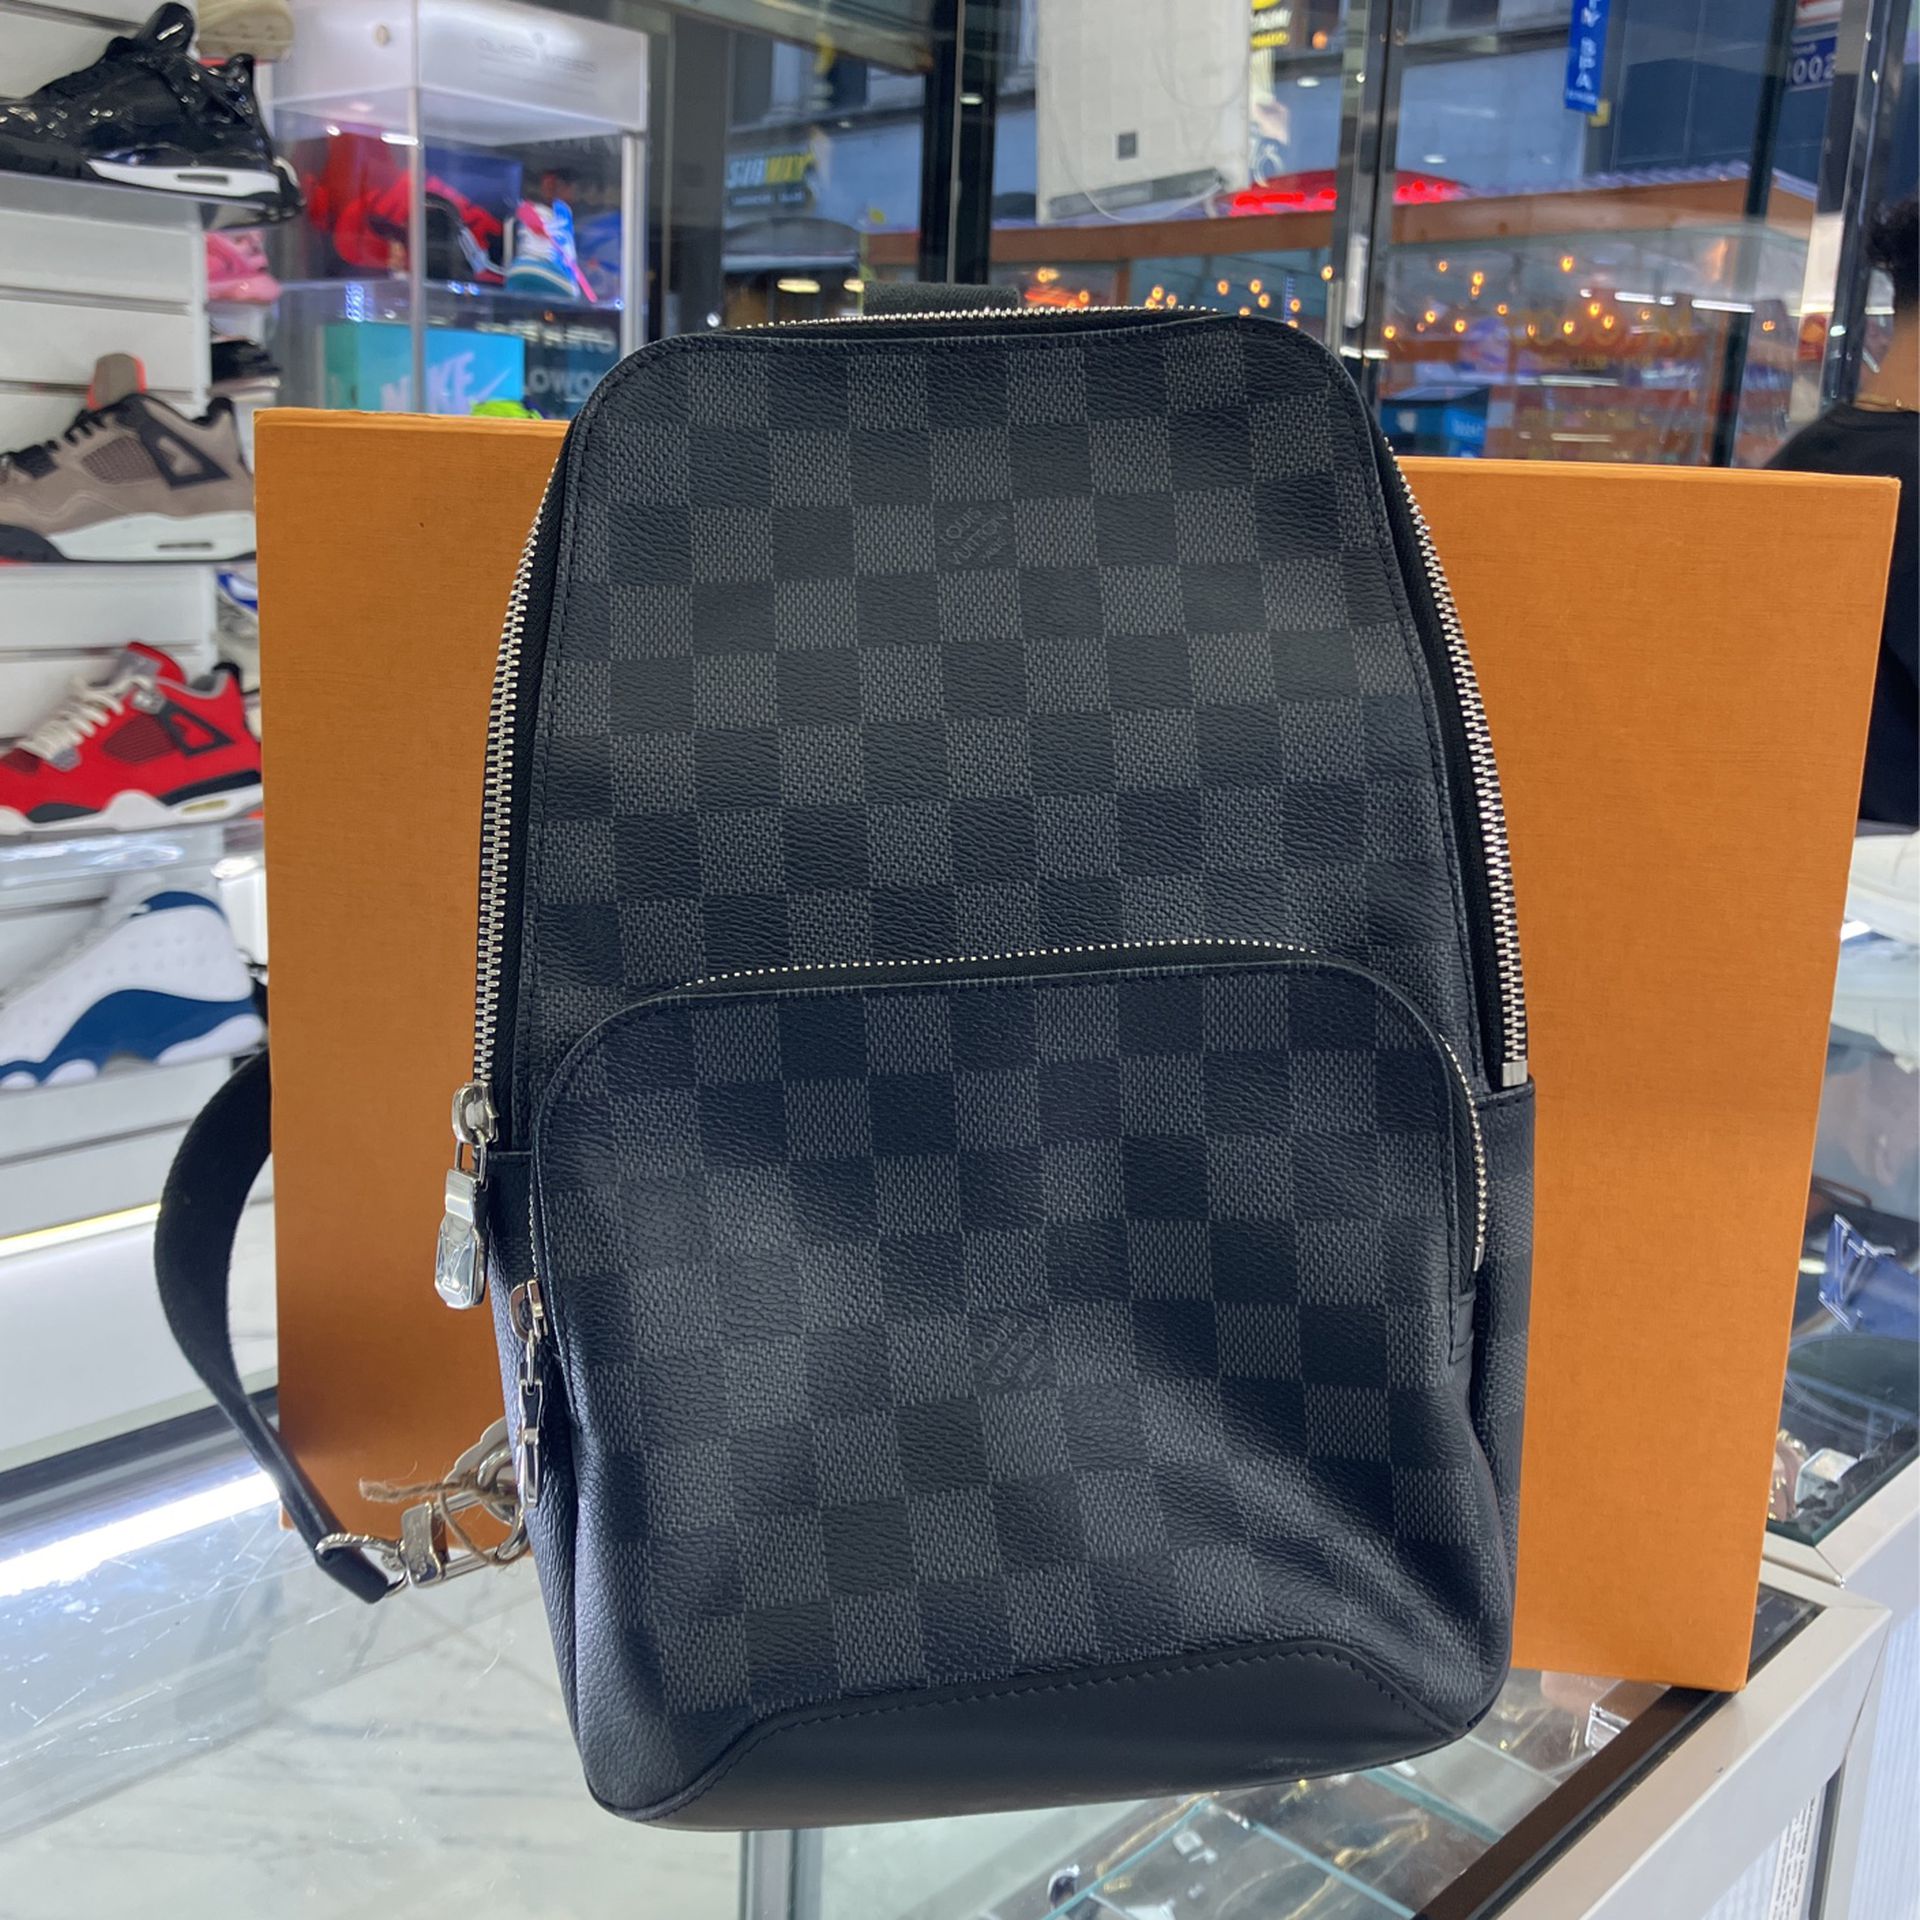 Louis Vuitton Sling Bag for Sale in Miami, FL - OfferUp